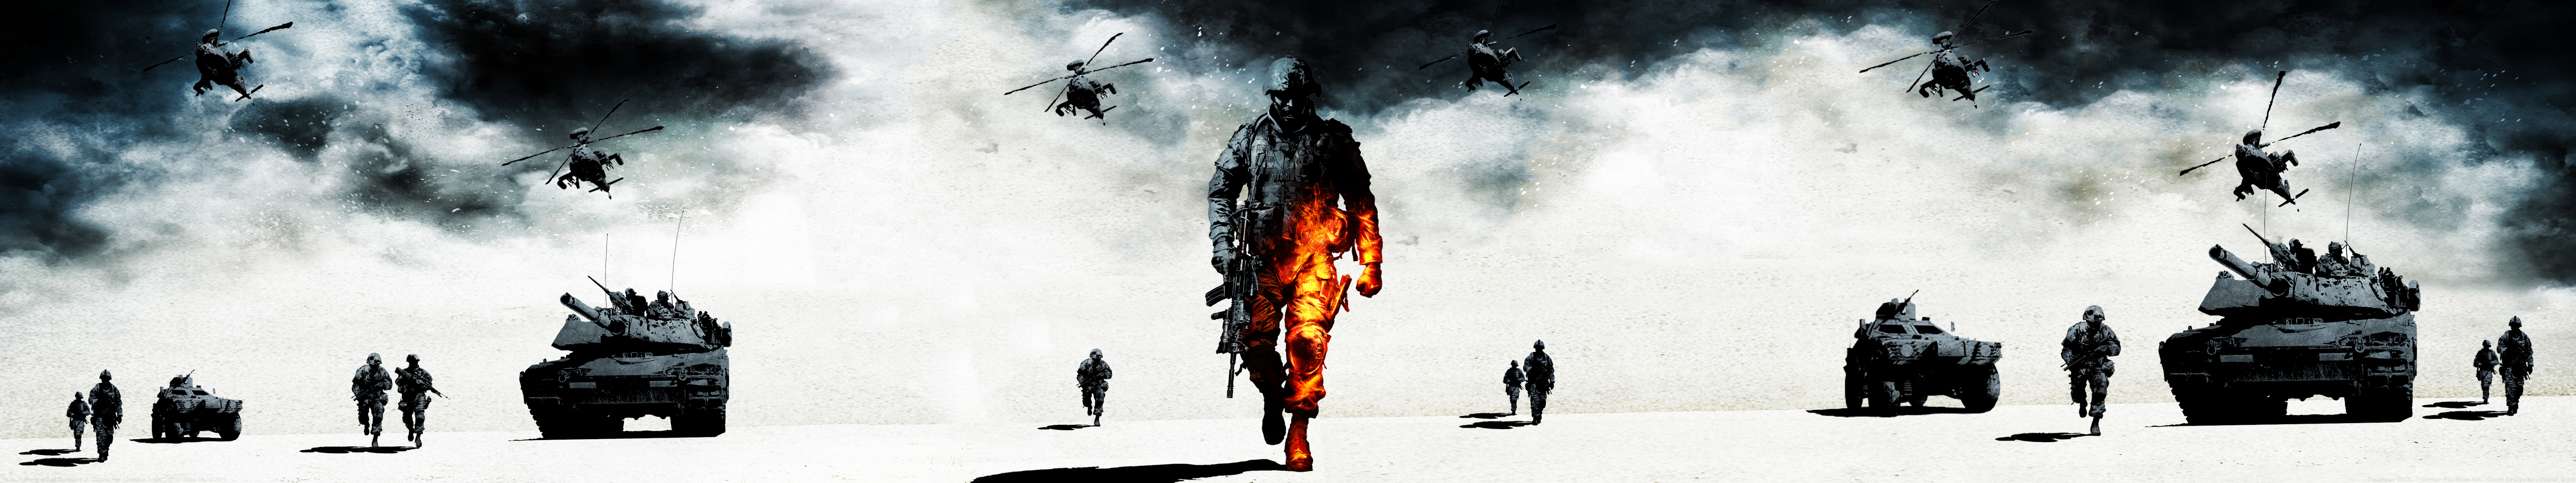 Video Game Battlefield: Bad Company 2 HD Wallpaper | Background Image